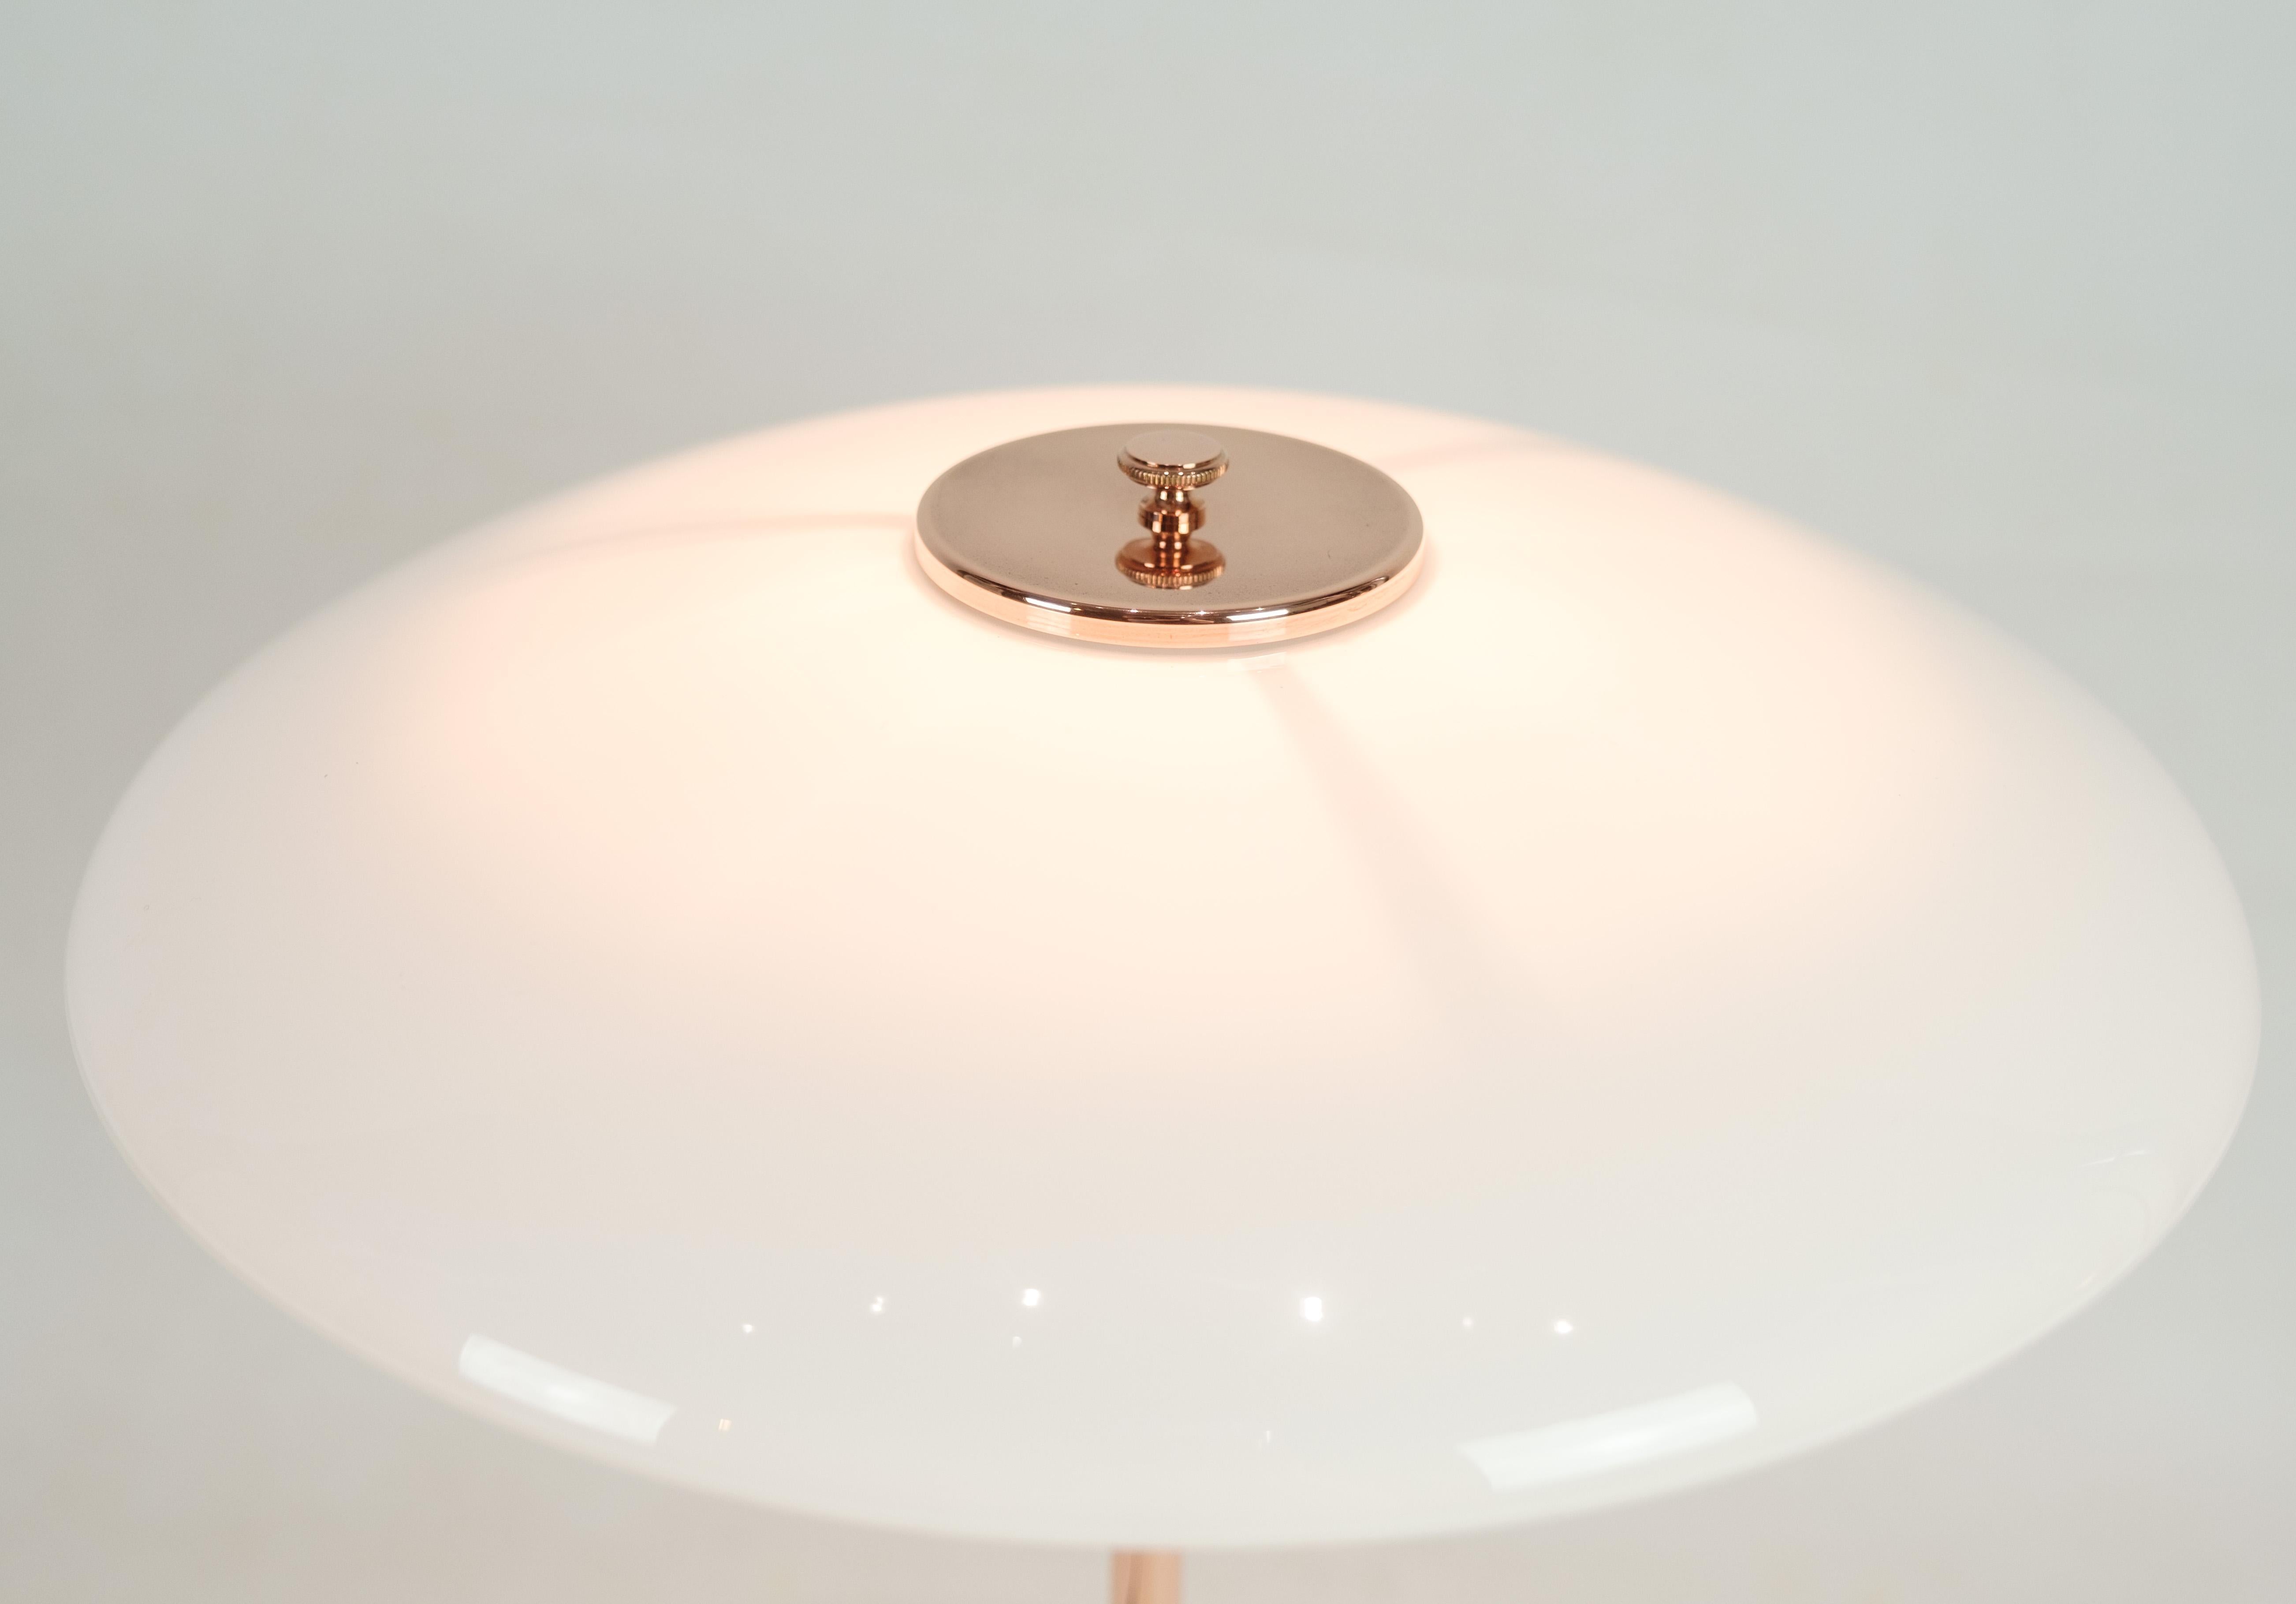 PH Table lamp, model PH3½-2½, limited edition, designed by Poul Henningsen and manufactured by Louis Poulsen. The lamp is made of copper with an upper shade in copper and two lower shades in white opal glass. An upper screen in white opal glass is